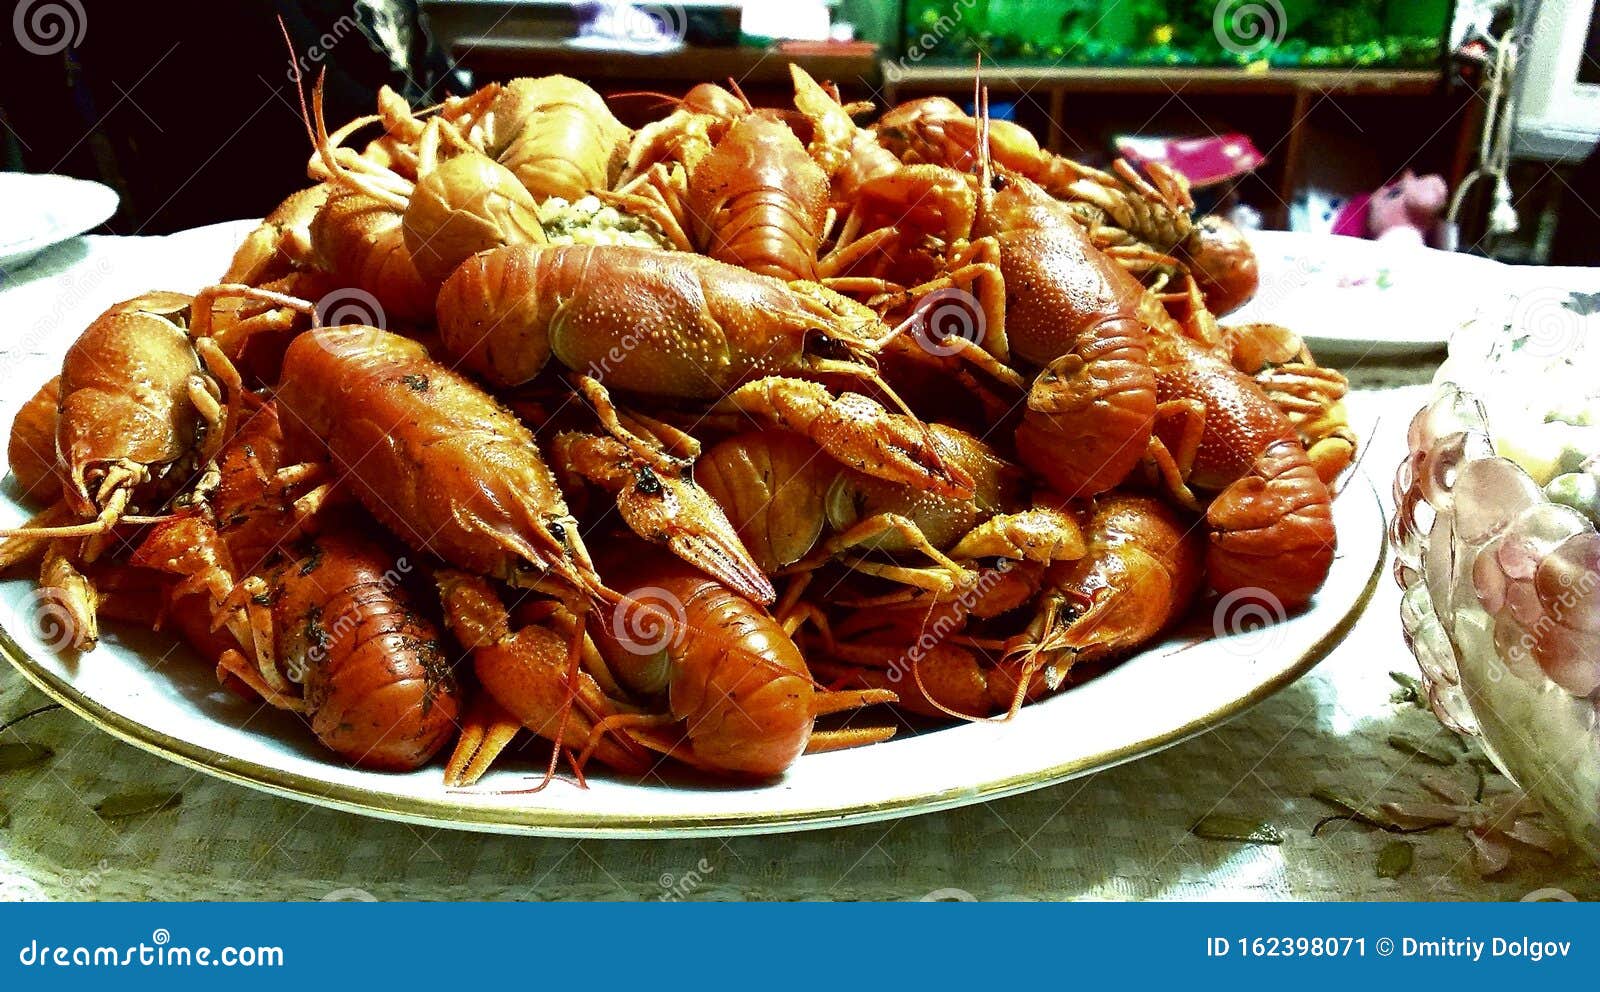 crayfish, yummy, the most delicious food